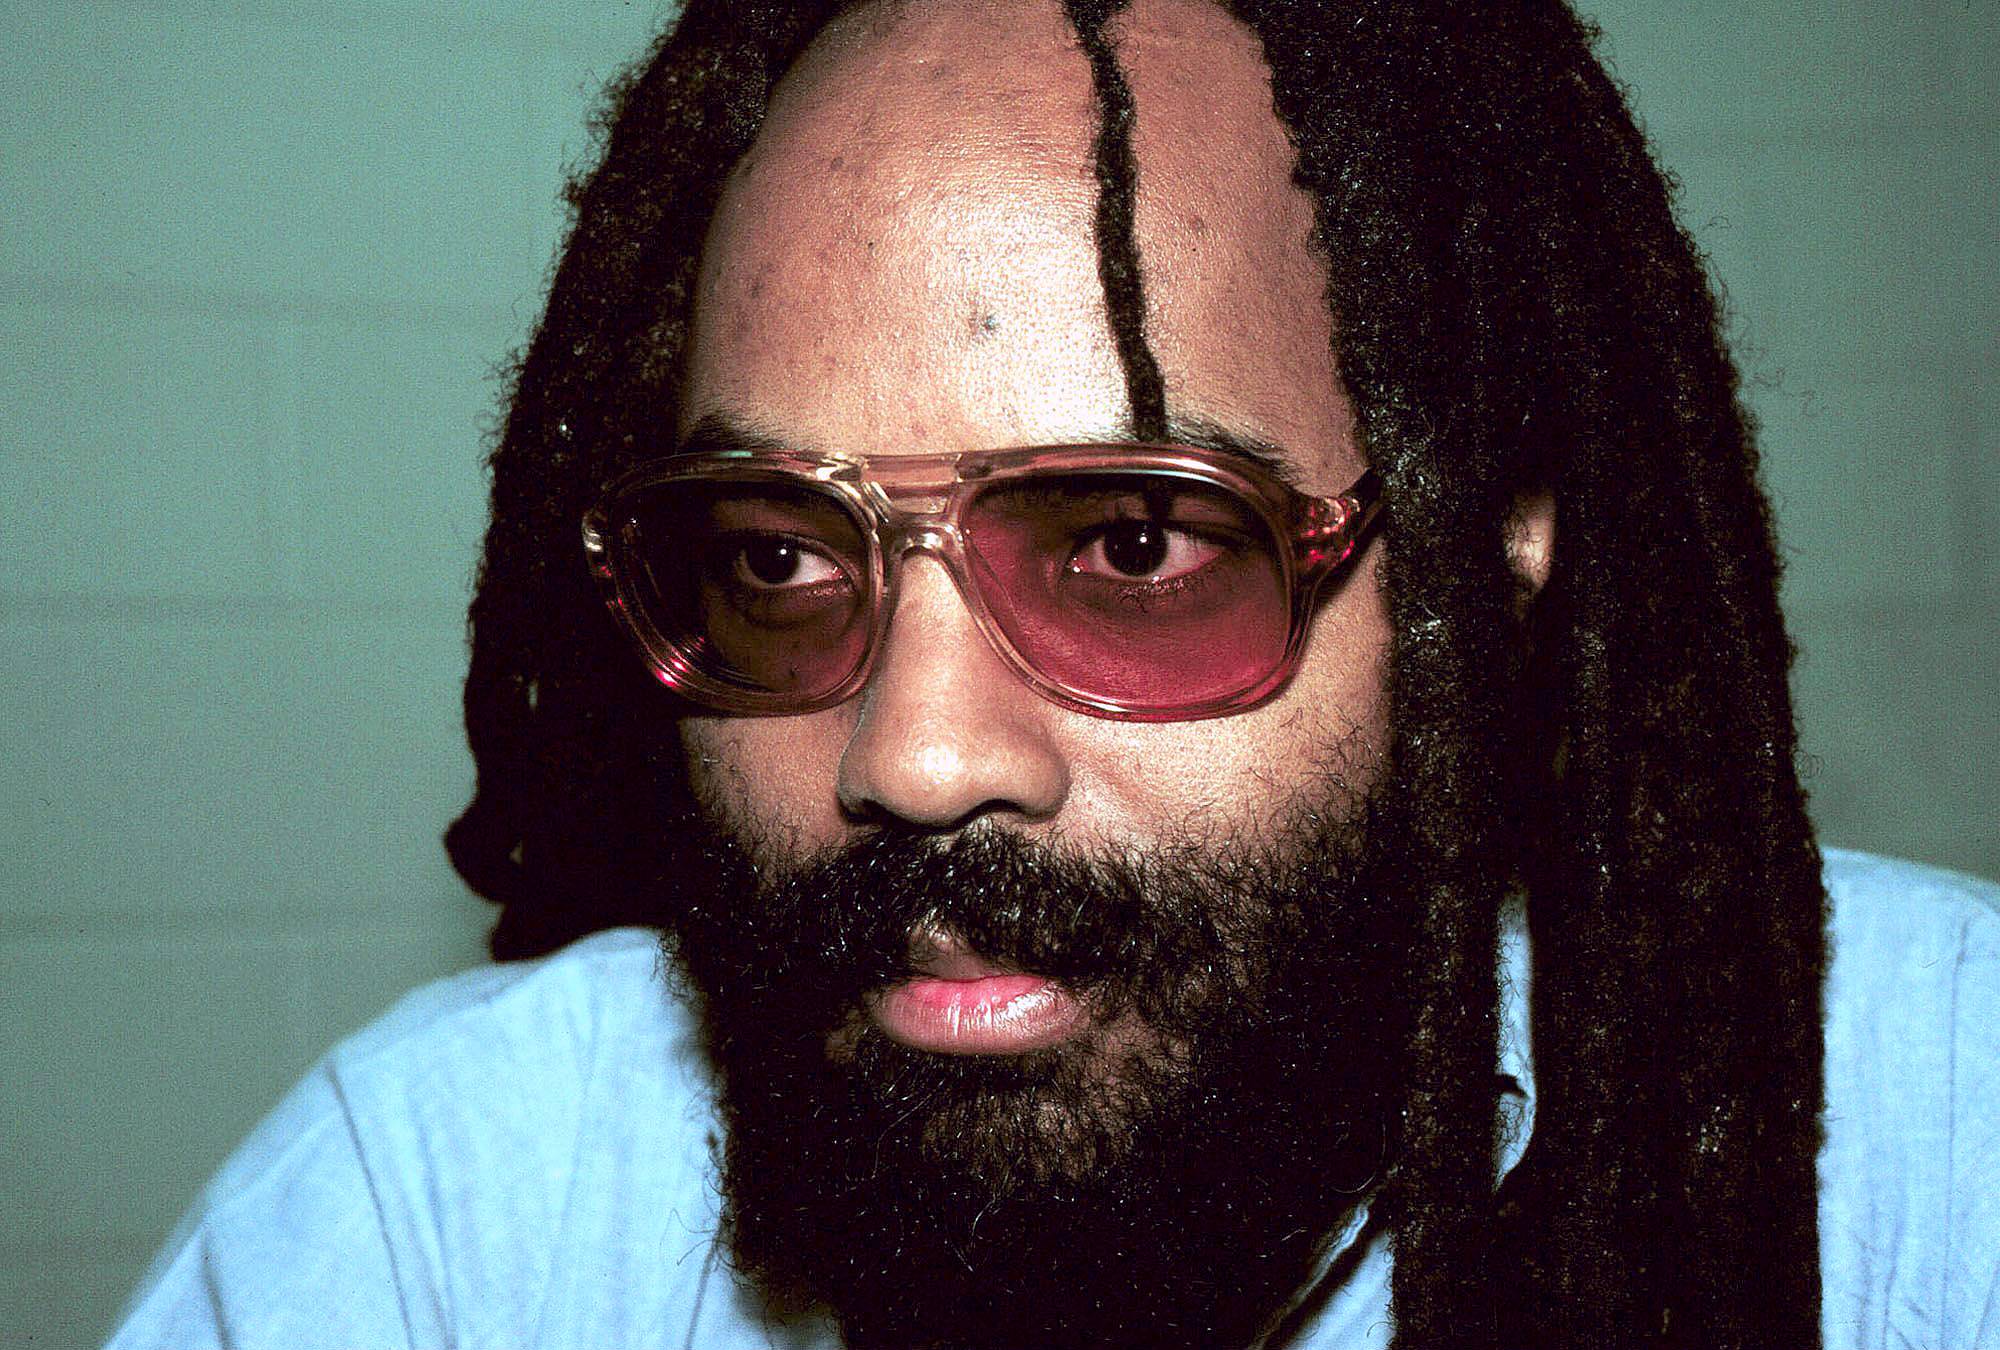 Mumia Abu-Jamal Moved to General Prison Population - For the first time since his arrest for the murder of a Philadelphia police officer three decades ago, former Black Panther and former death row inmate&nbsp;Mumia Abu-Jamal&nbsp;was moved into the general prison population on Friday.(Photo: Lisa Terry/Getty Images)